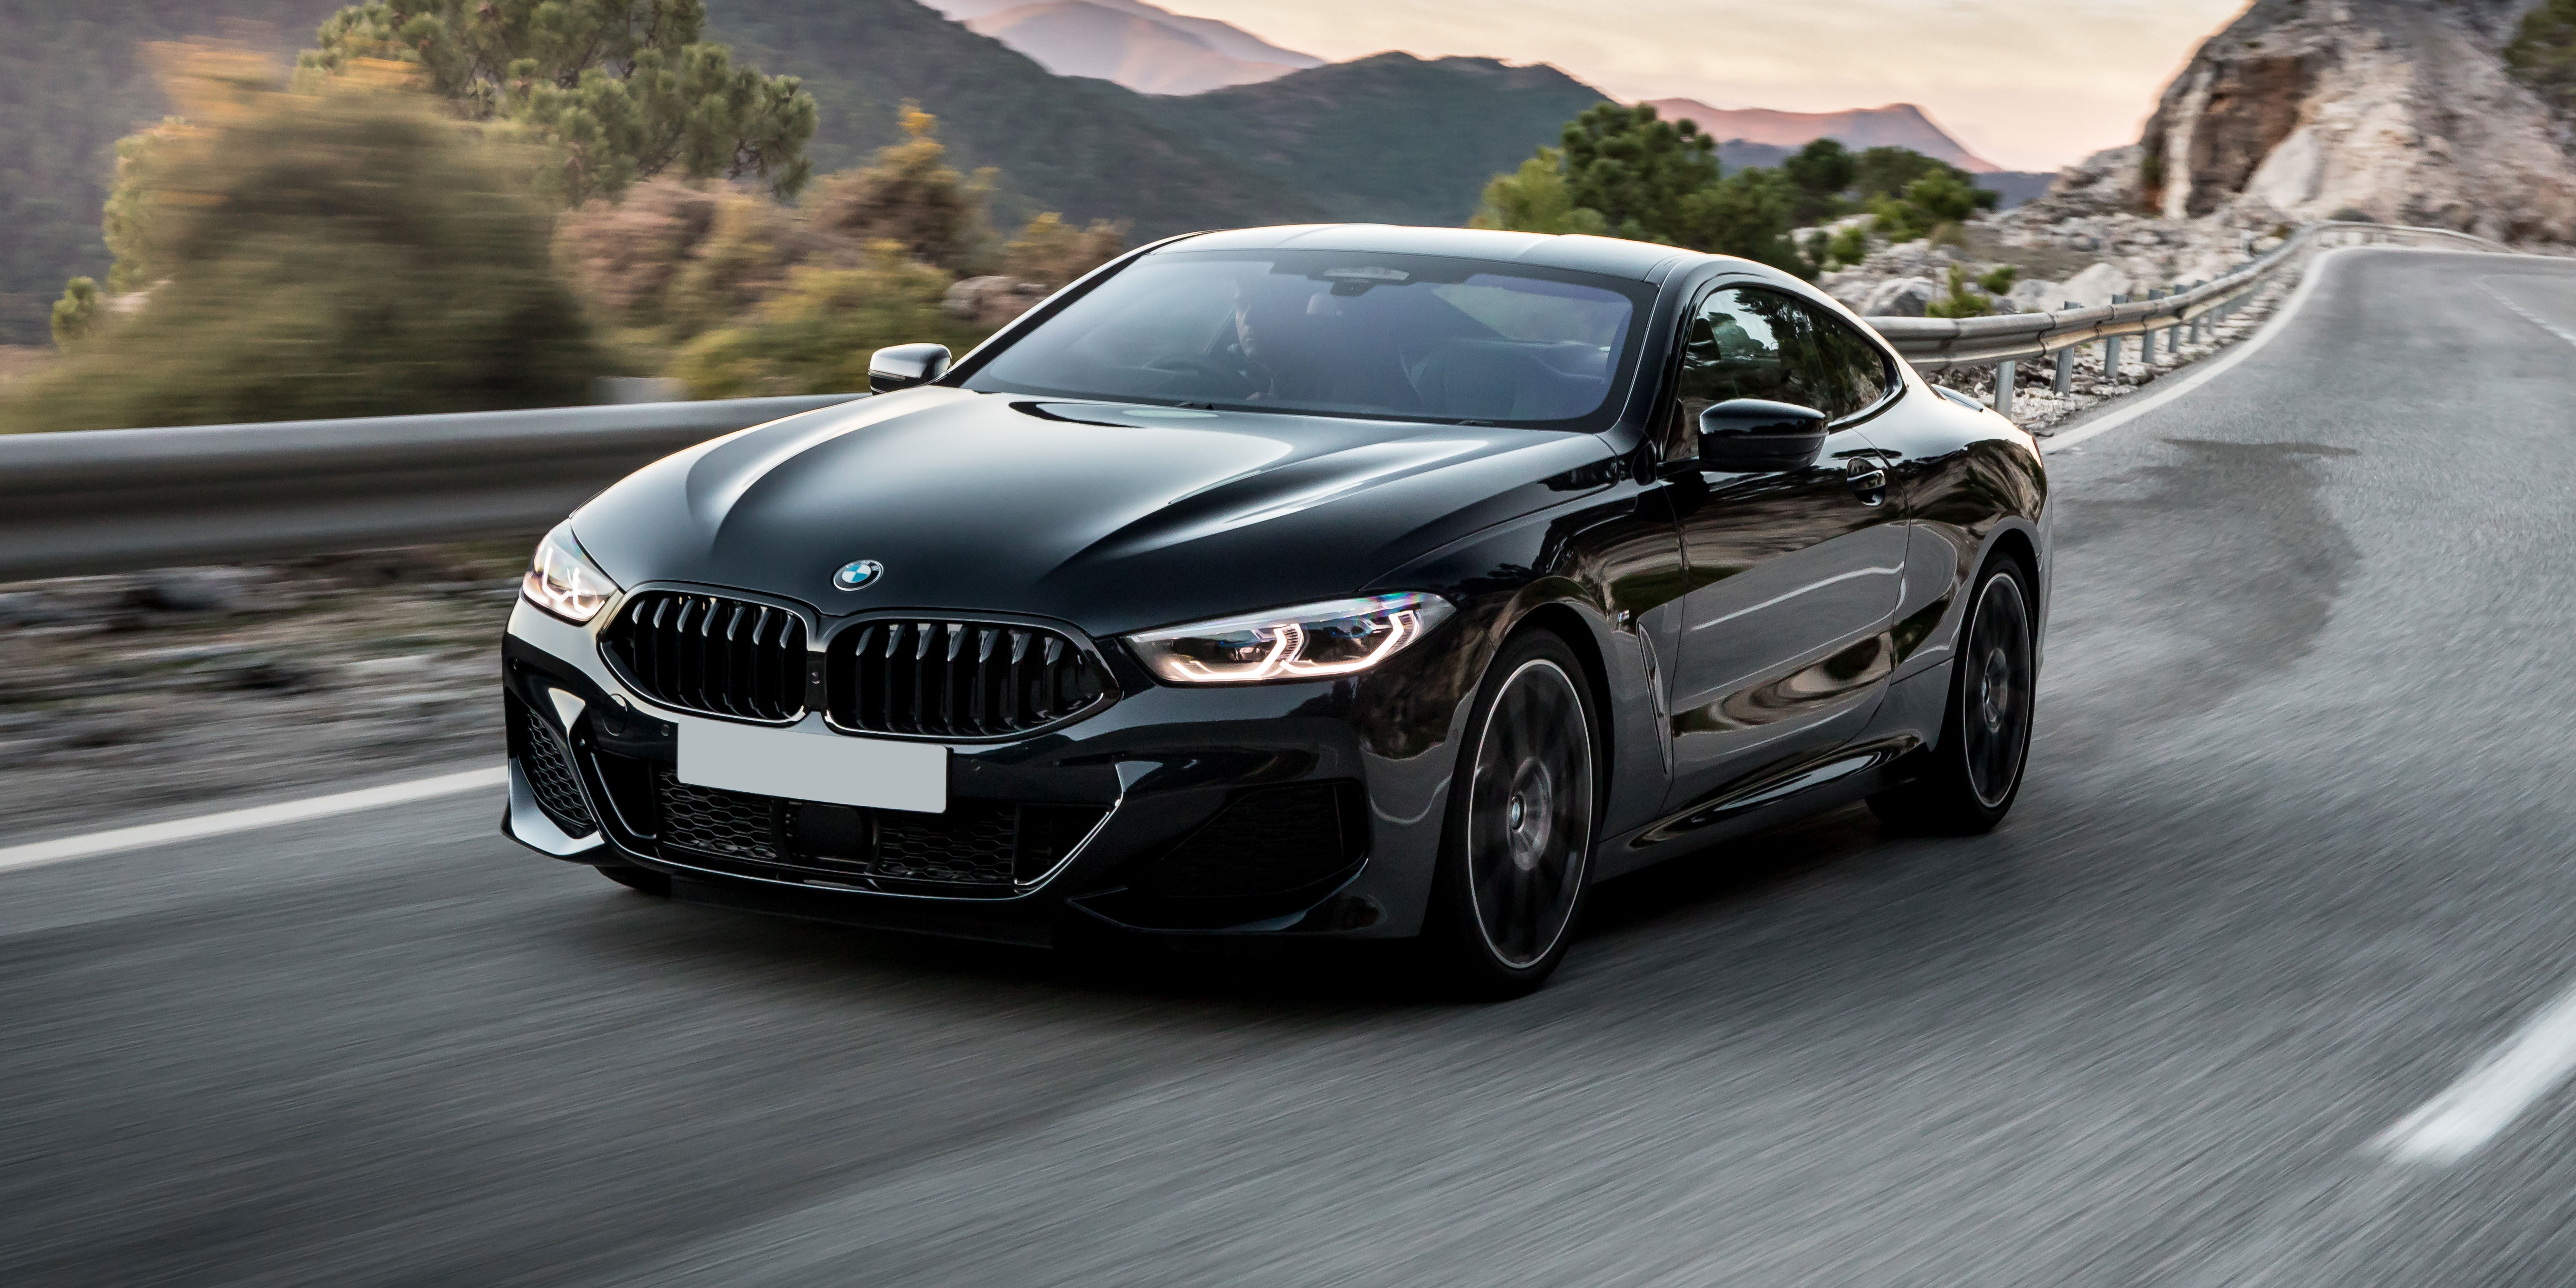 2022 Bmw 8 Series Sedan Price Specs And Review Images and Photos finder